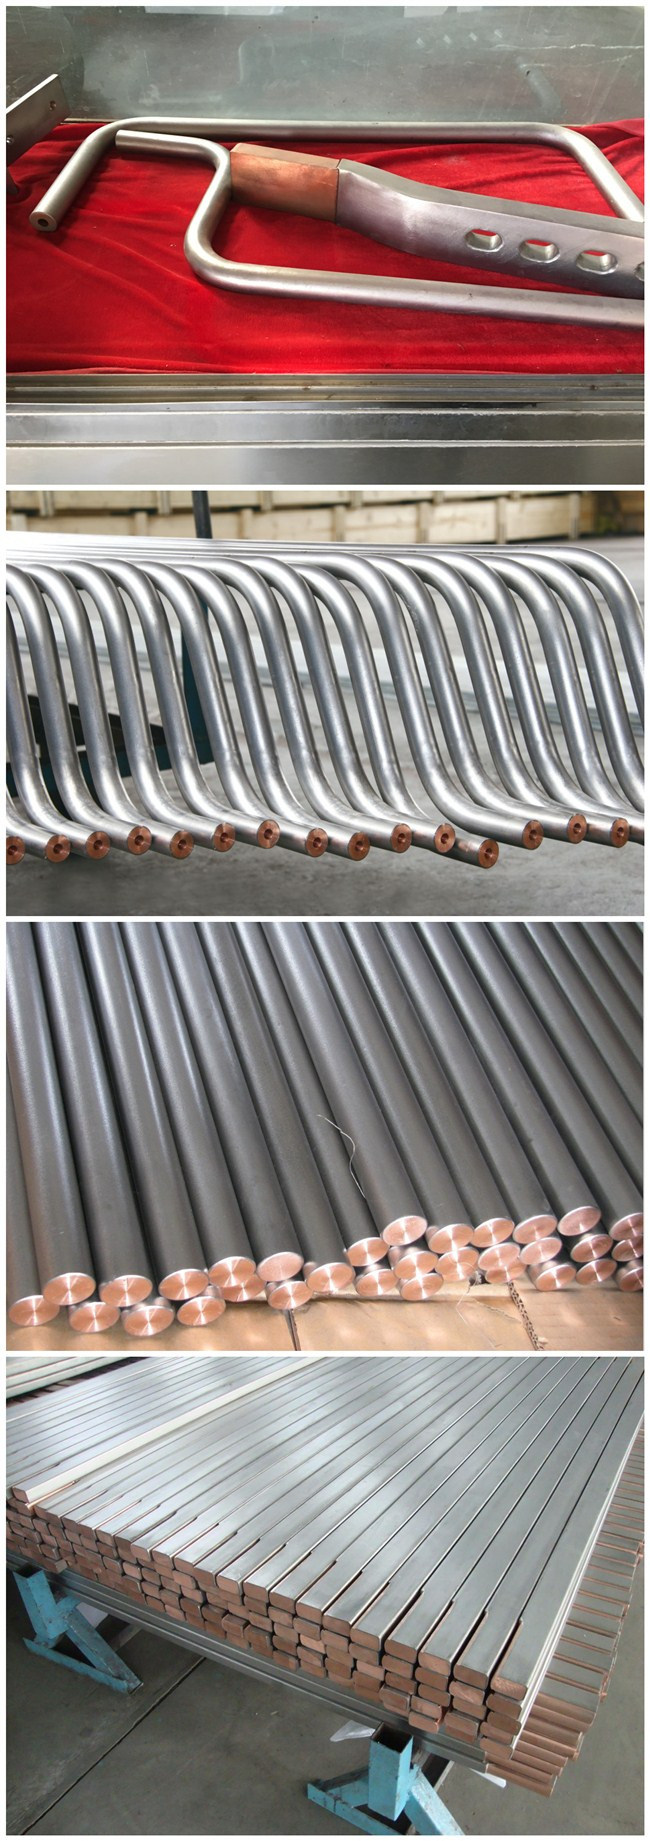 High Quality Titanium Clad Copper Bar for Water Electrolysis Flat Rectangular Square Rod Hex